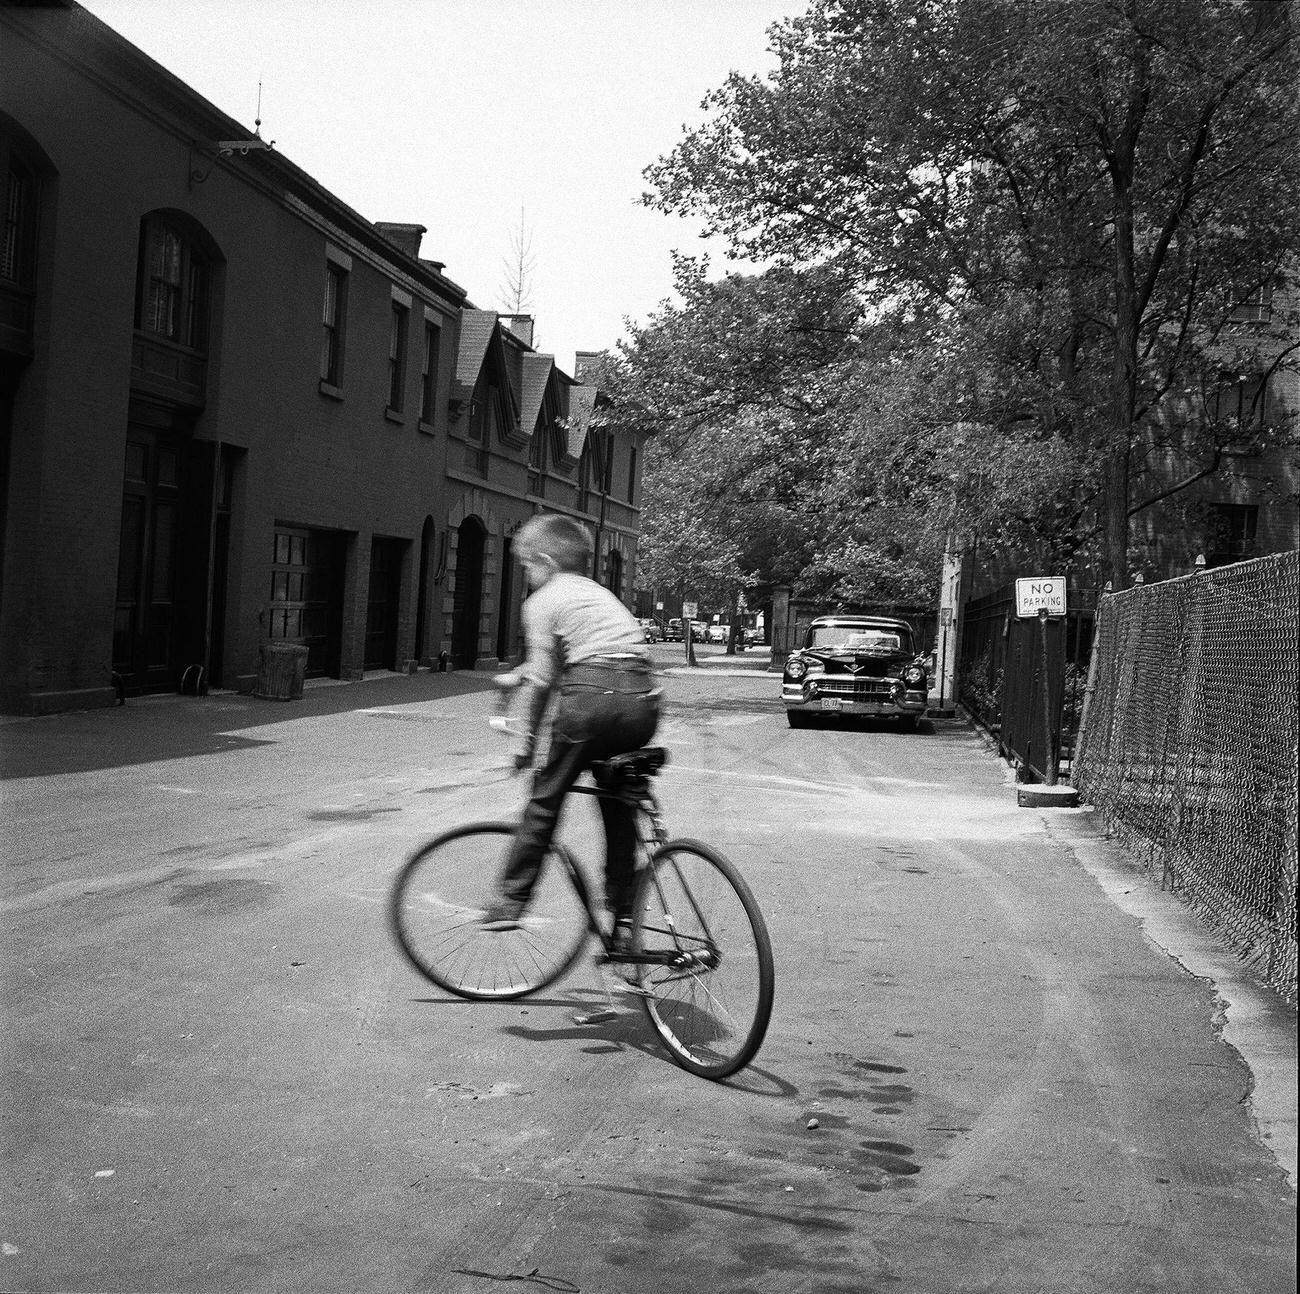 Young Boy Riding His Bicycle On The Street In Brooklyn Heights, 1958.